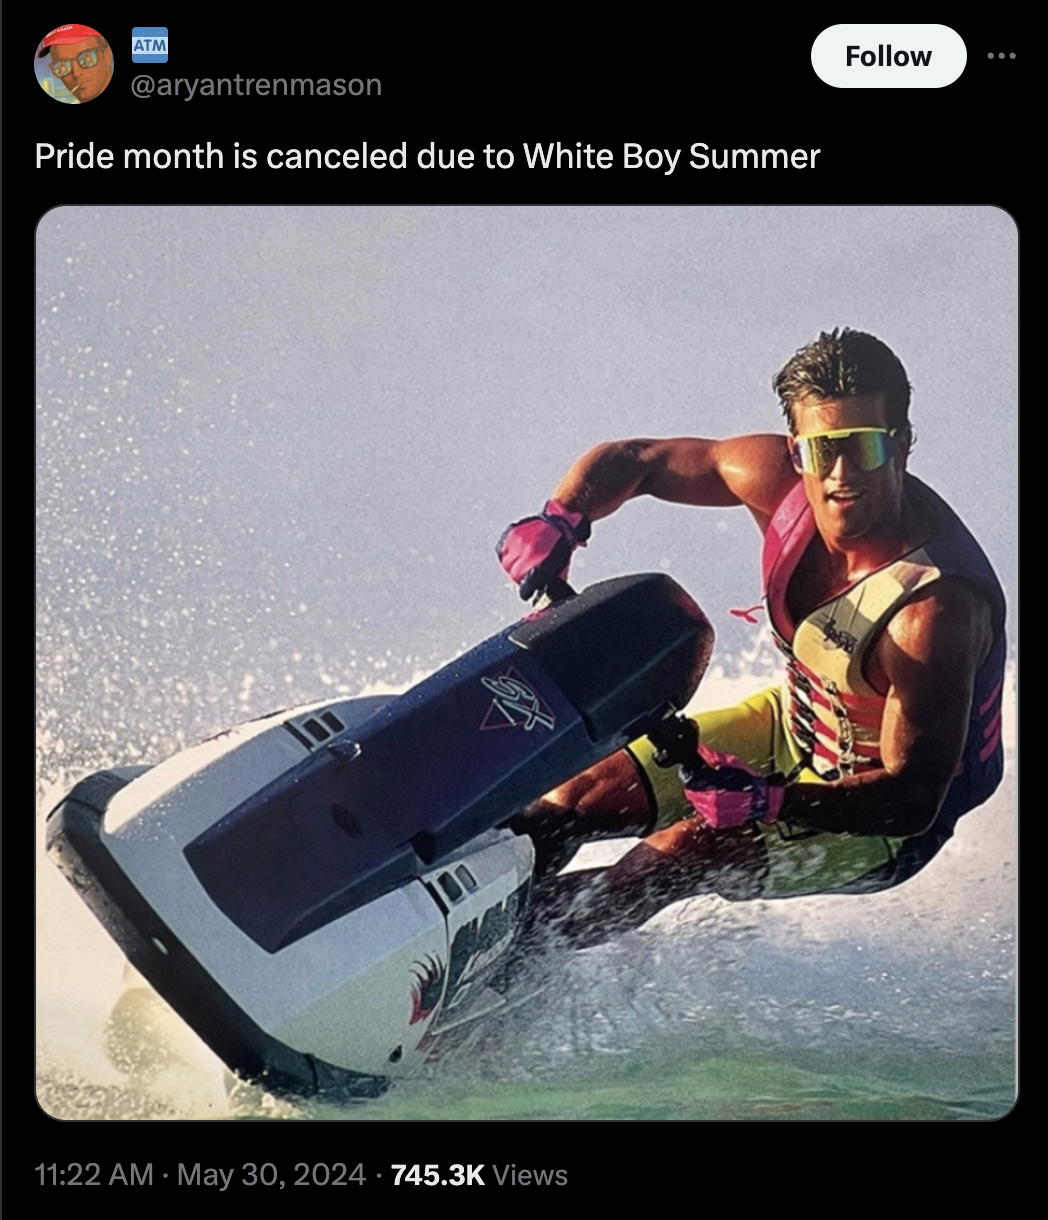 jet ski - Pride month is canceled due to White Boy Summer Views